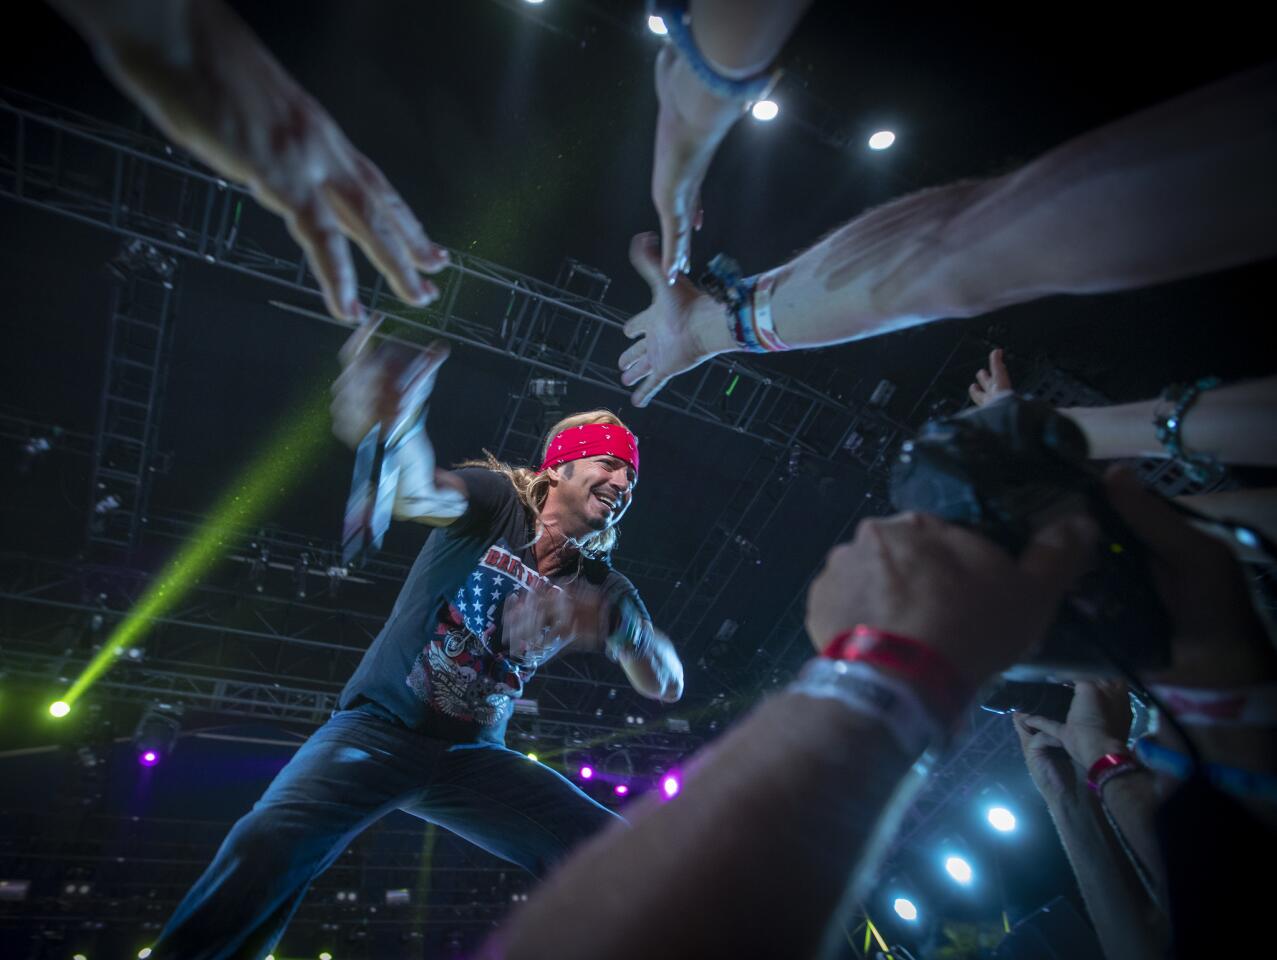 Rocker Bret Michaels greets fans as he performs on the Palomino Stage on the first day of the three-day 2019 Stagecoach Country Music Festival.